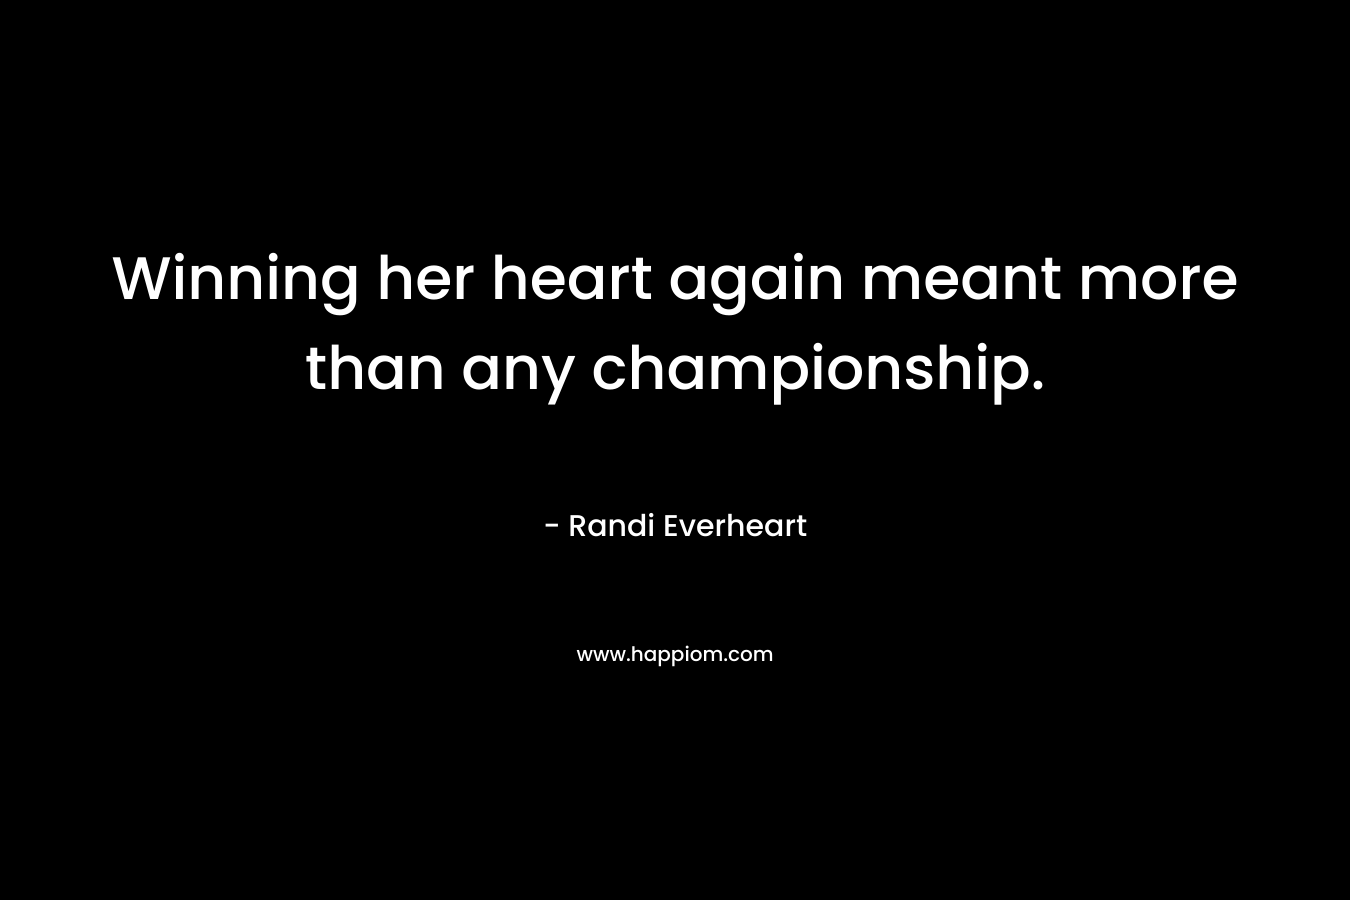 Winning her heart again meant more than any championship. – Randi Everheart